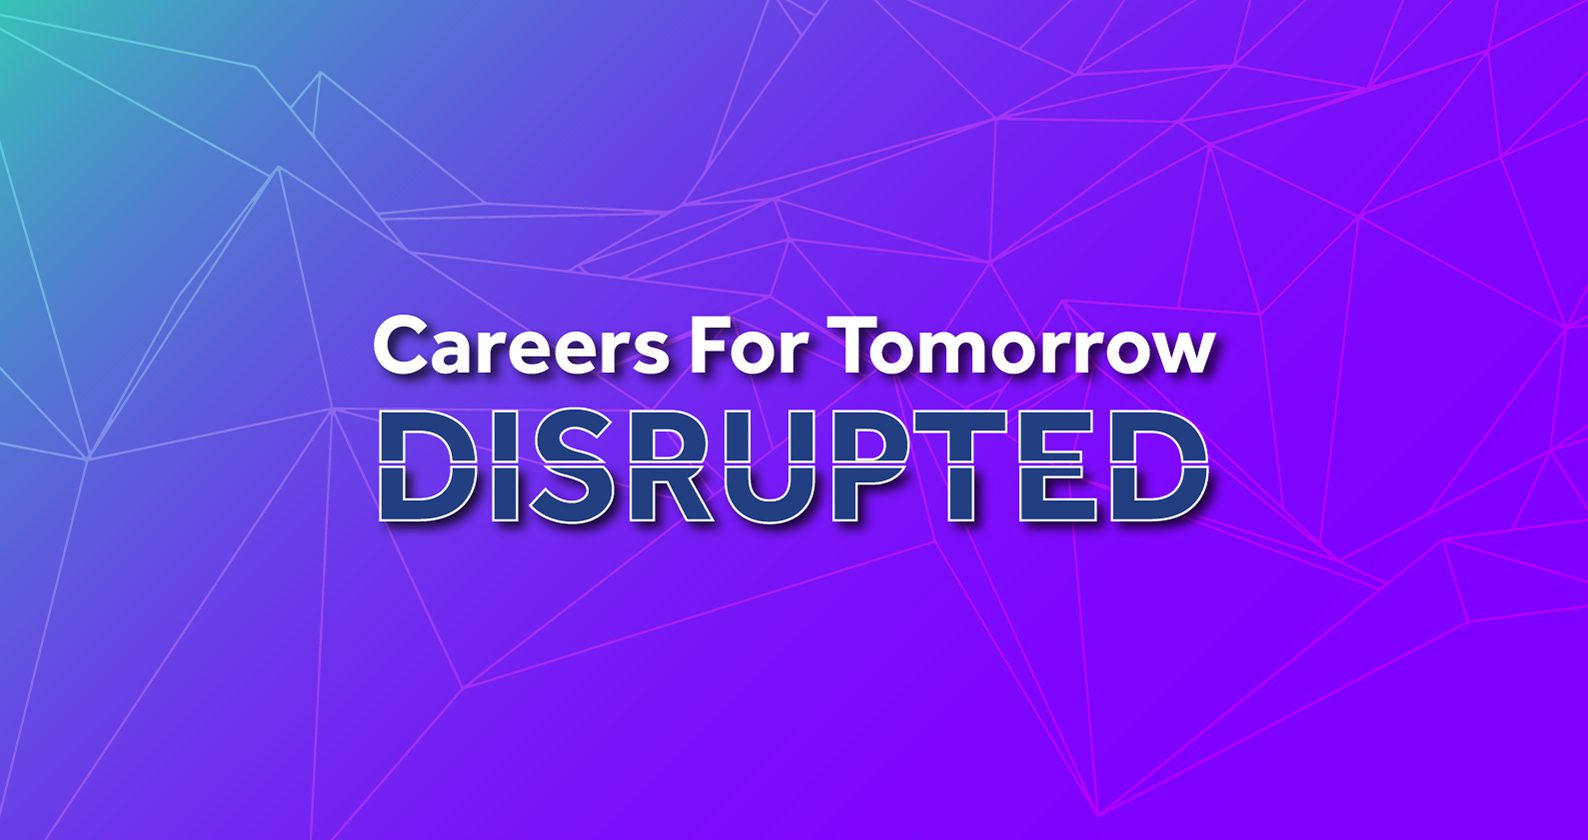 Image for Careers For Tomorrow Disrupted